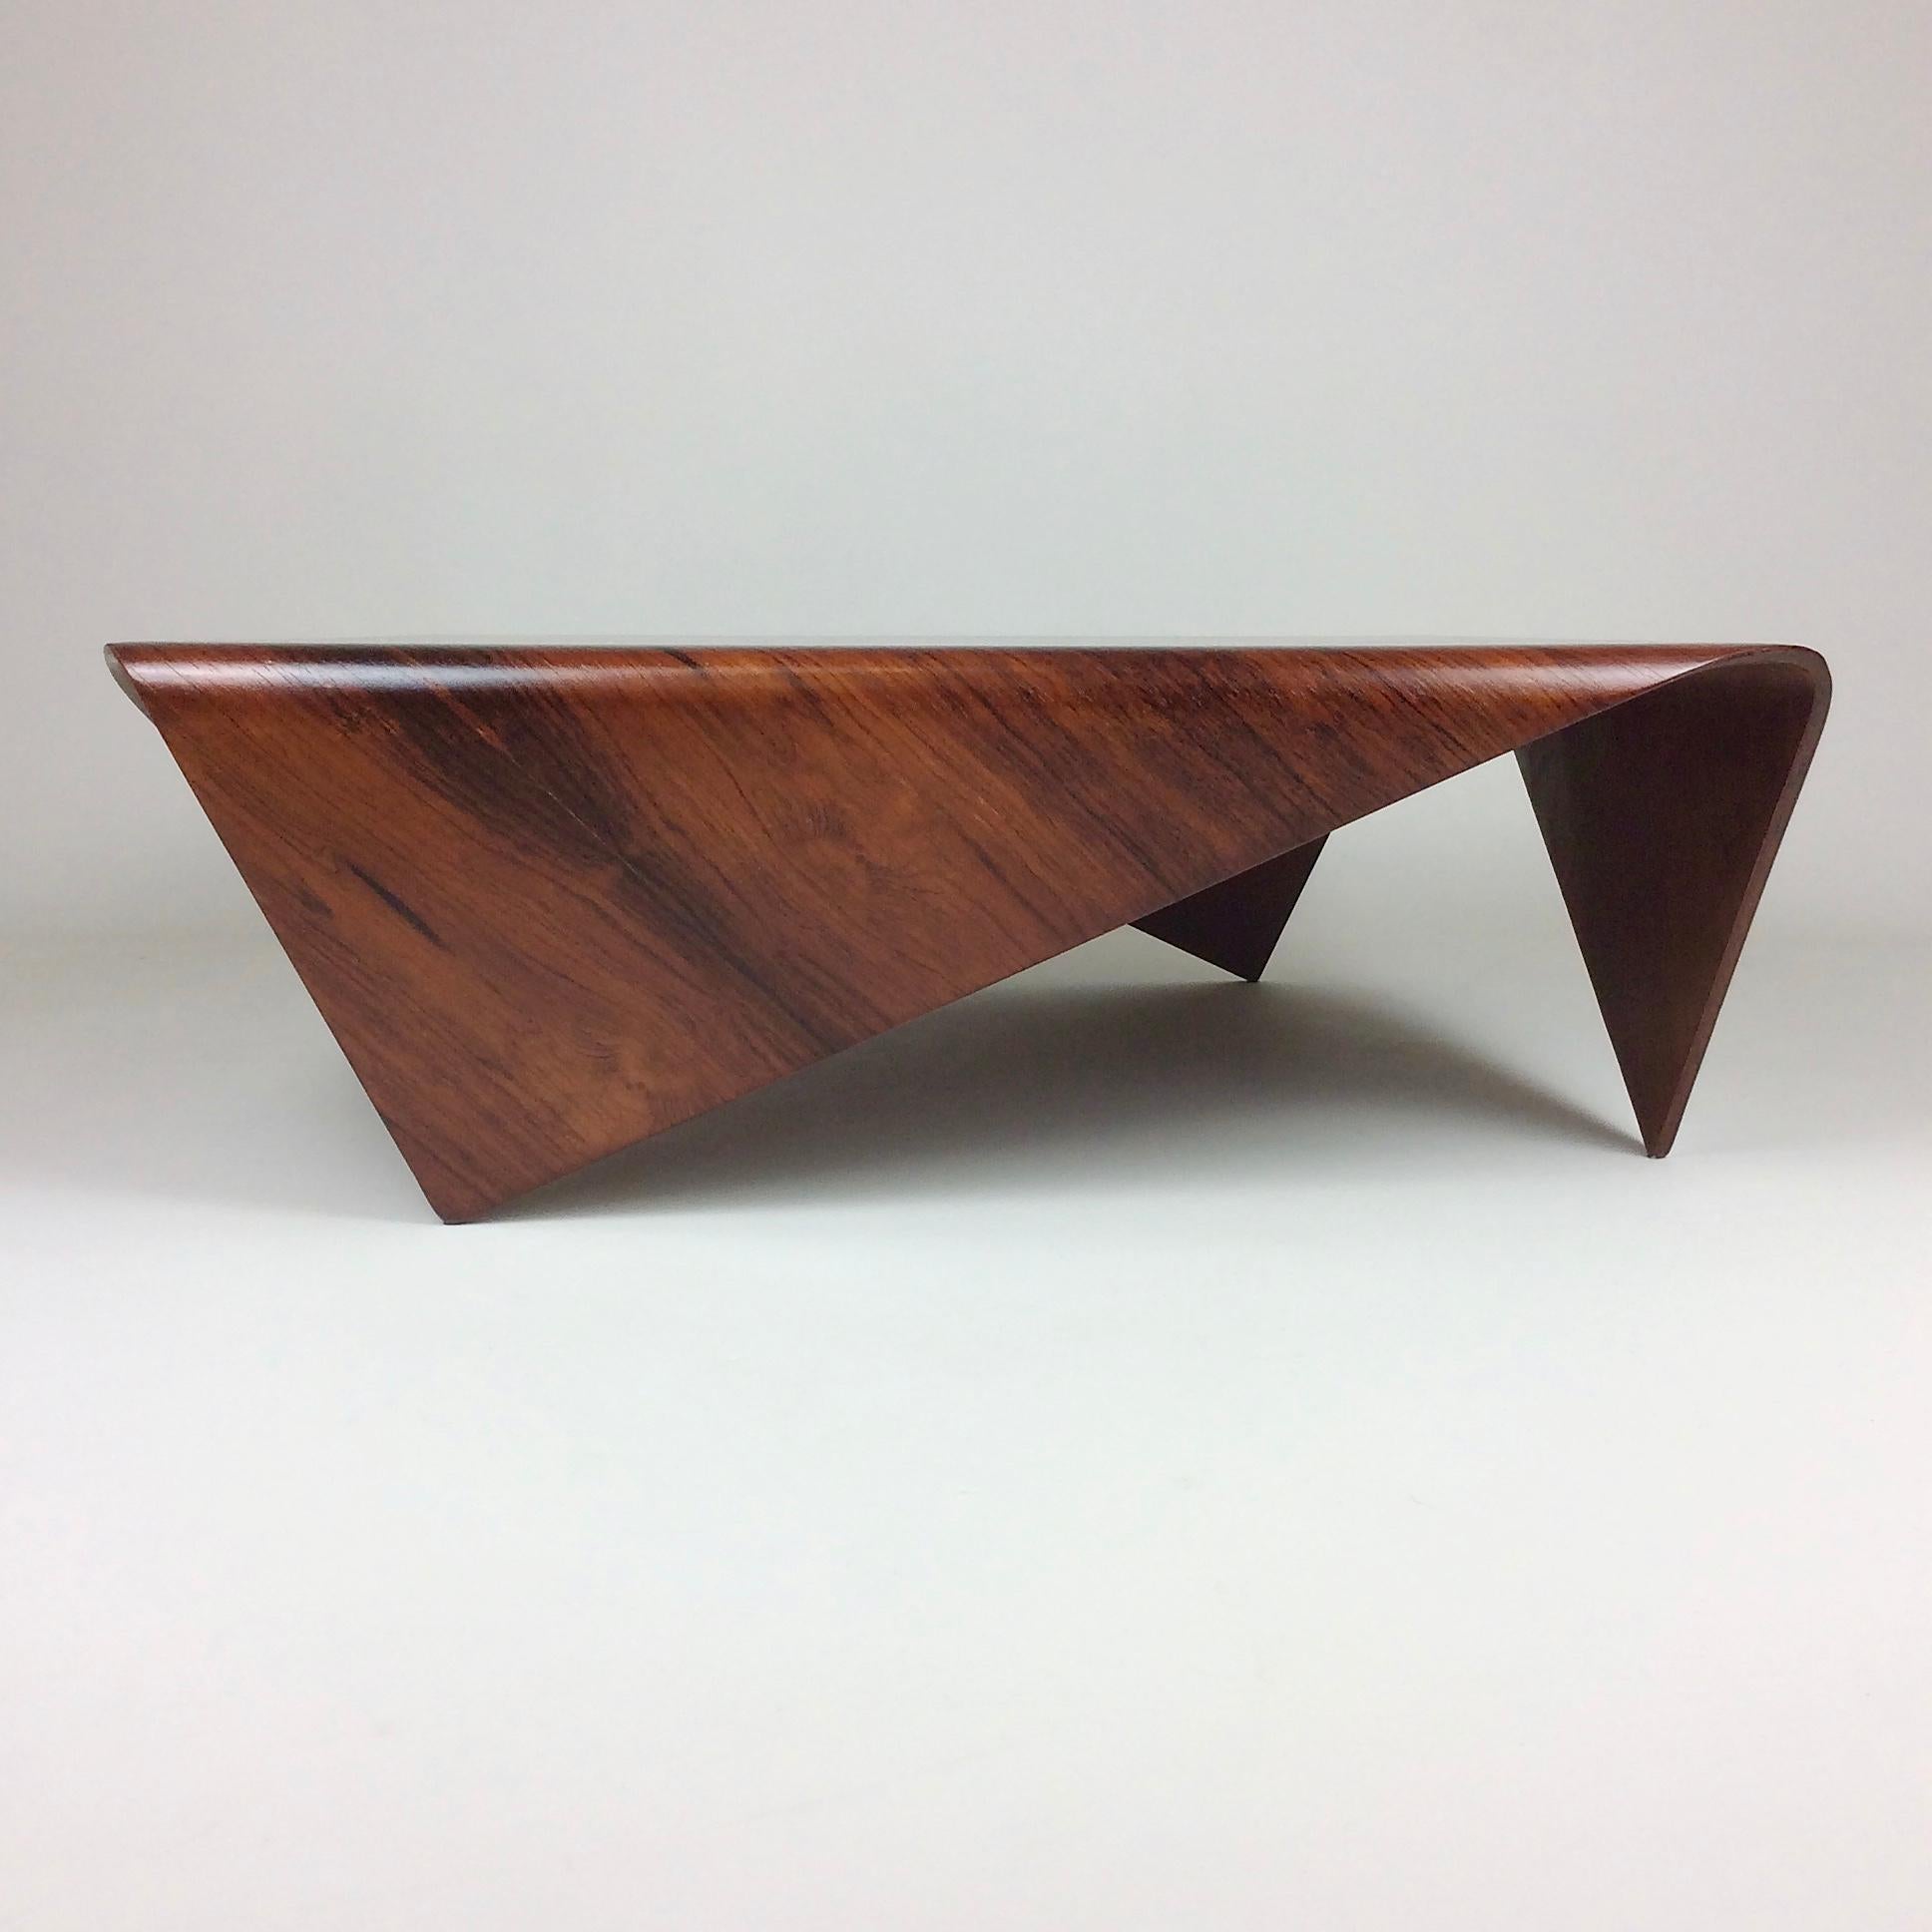 Nice Jorge Zalszupin vintage coffee table, square Andorinha model for L' Atelier, circa 1960, Brazil.
Beautiful plywood work. 
Dimensions: 80 cm W, 80 cm D, 27 cm H.
Good condition, professional refinishing in respect of the object.
All purchases